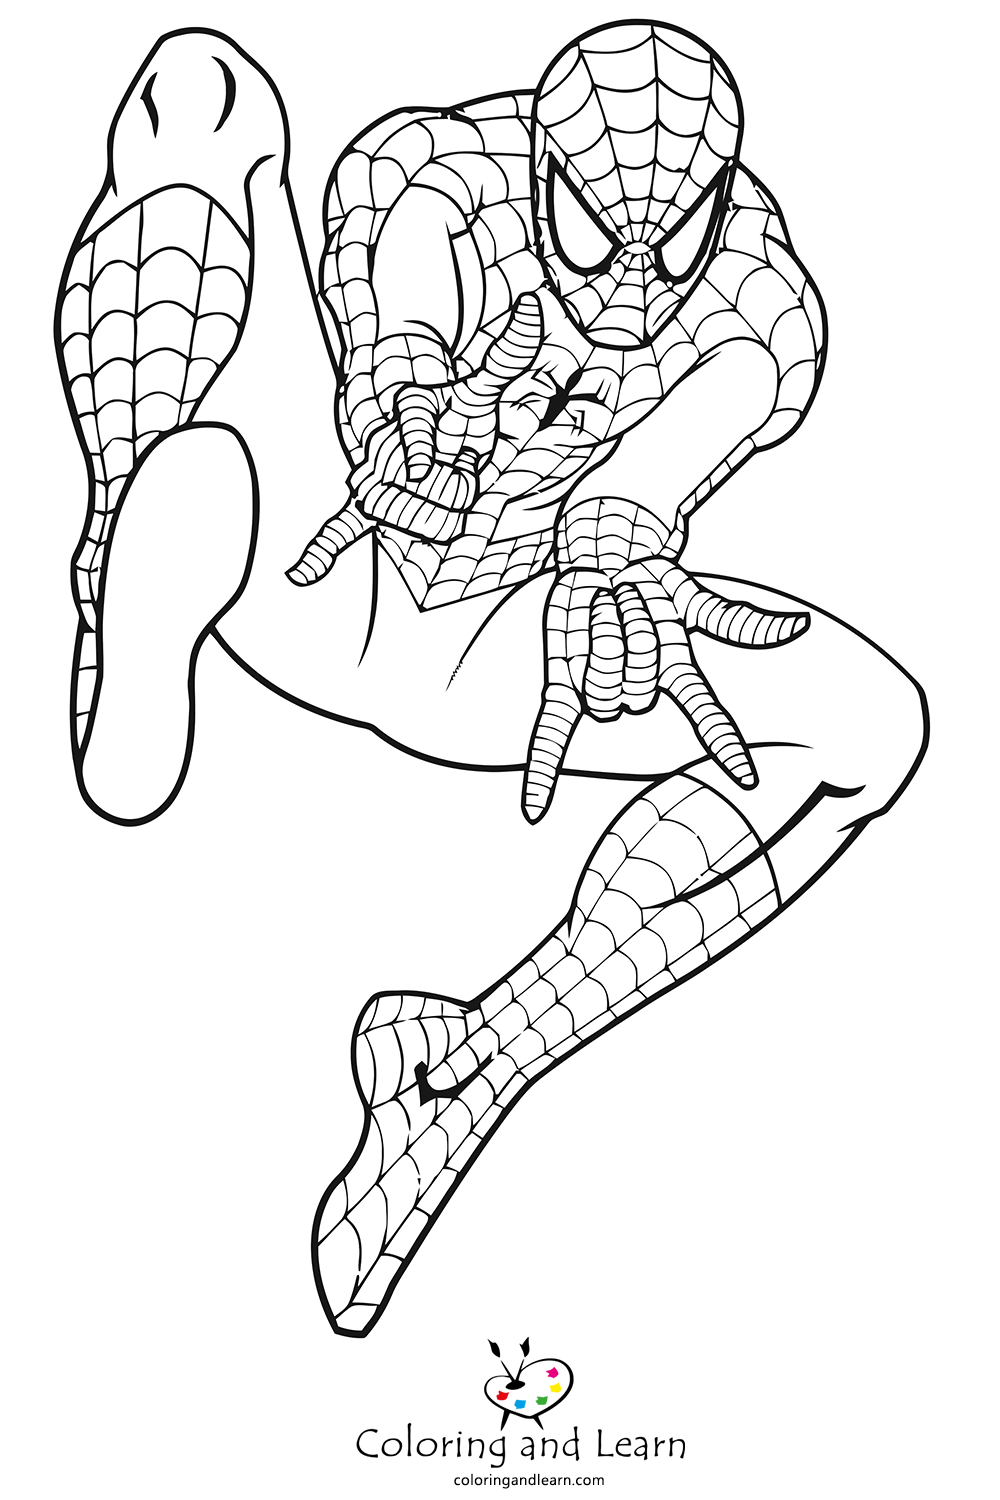 Print Spiderman coloring page 